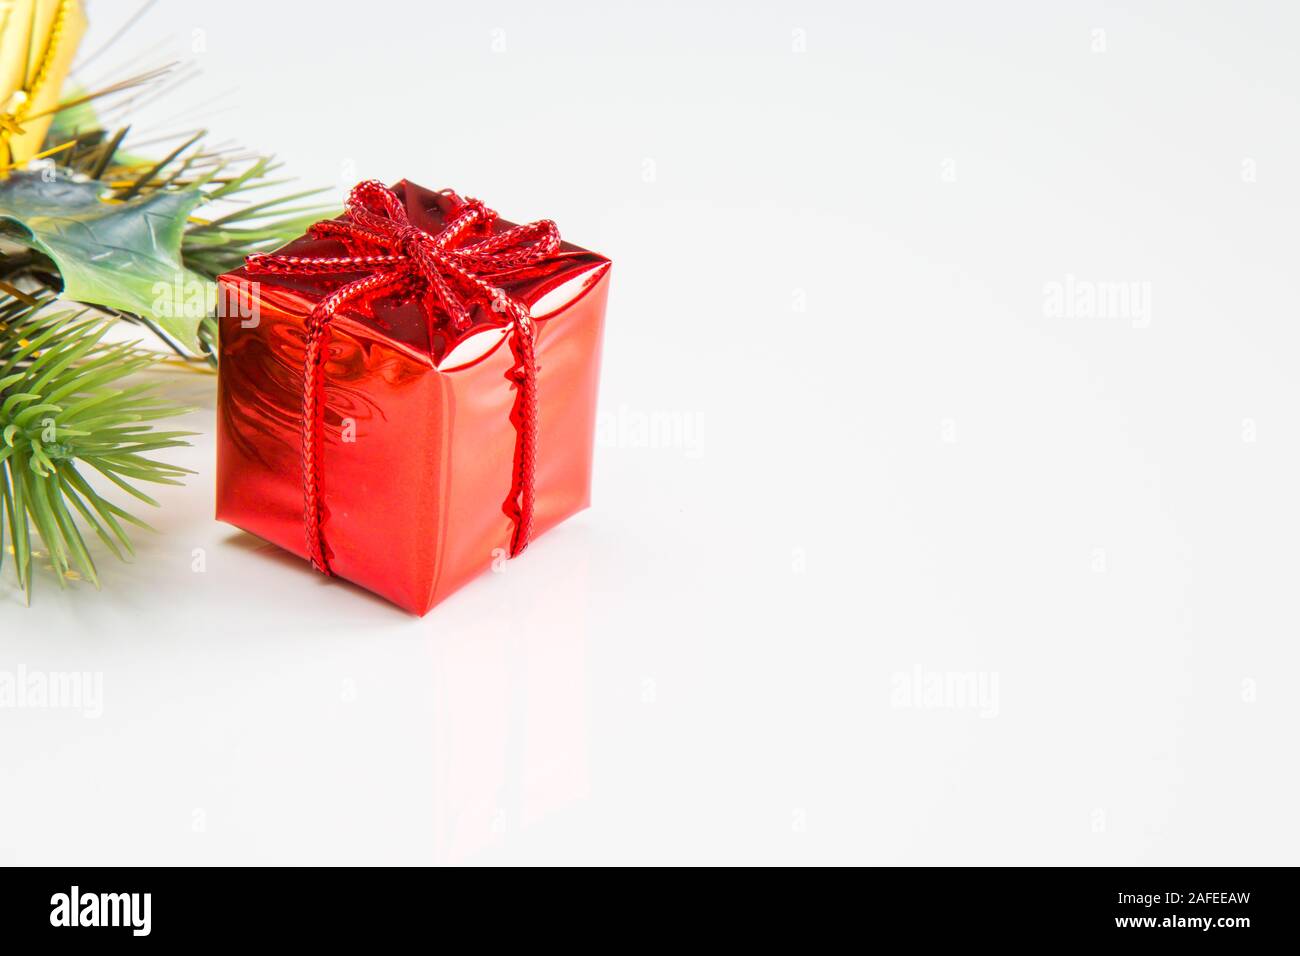 Closeup of red colored Christmas decoration box on white background Stock Photo